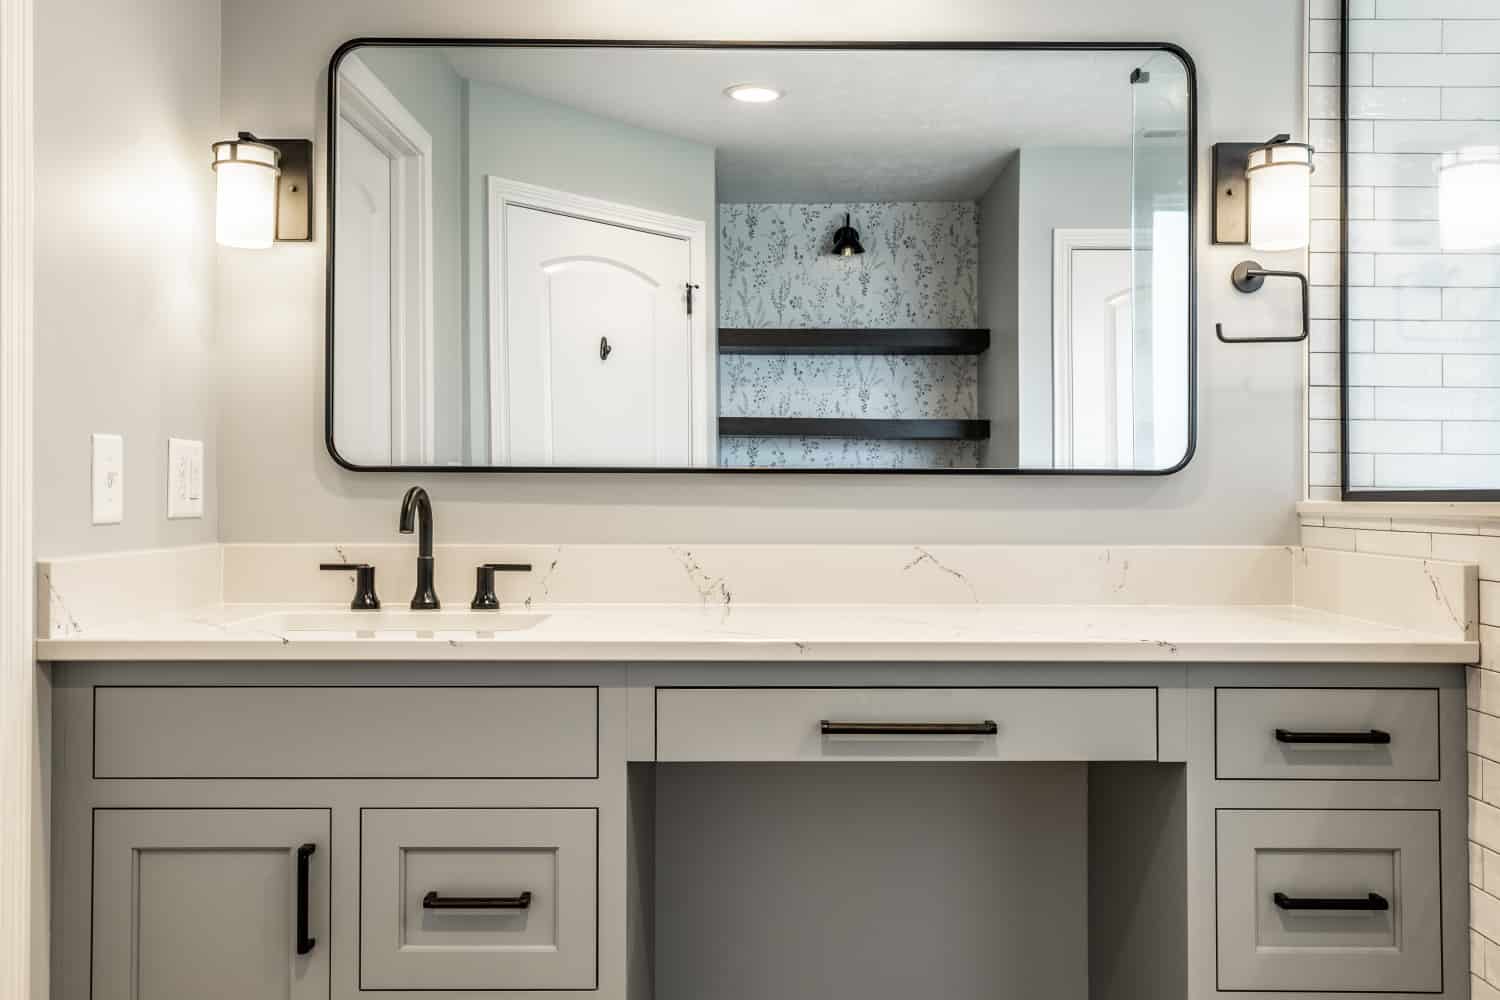 Nicholas Design Build | A bathroom with a gray vanity and mirror in a black and blue color scheme.